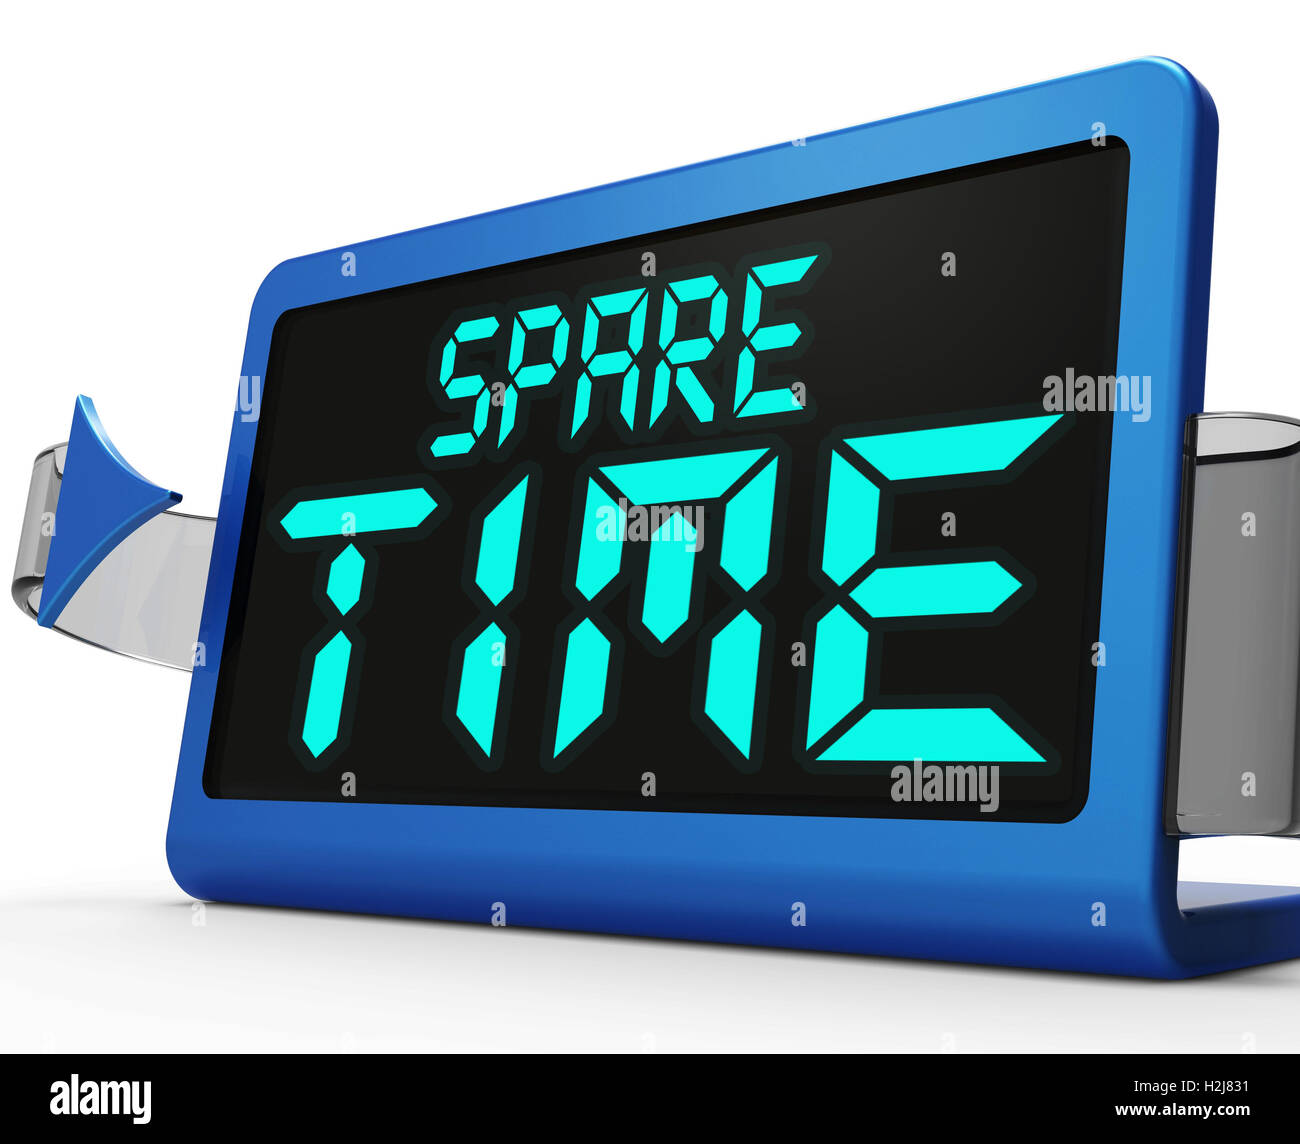 Spare Time Clock Means Leisure Or Relaxation Stock Photo